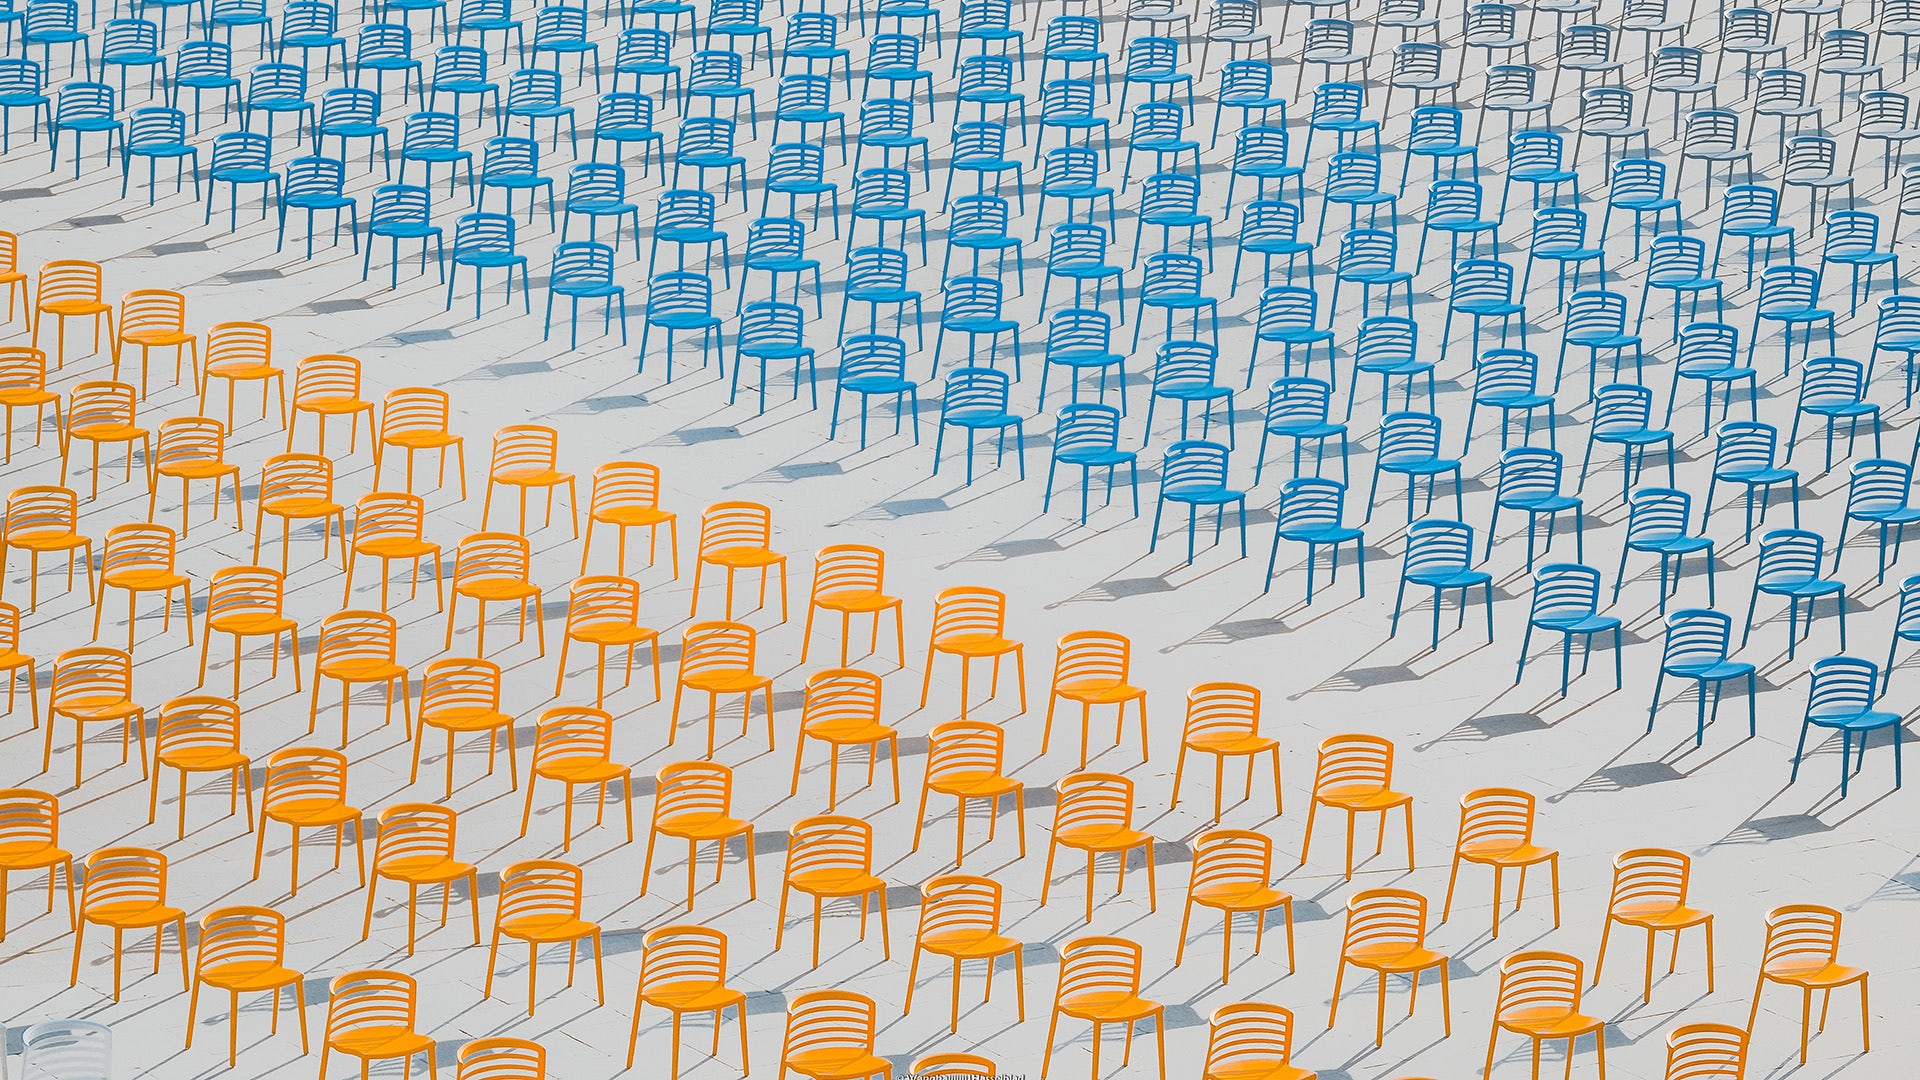 Photograph of rows of orange chairs arranged on the bottom half of the image and rows of blue chairs on the other half, as part of the Sony World Photo Awards 2023